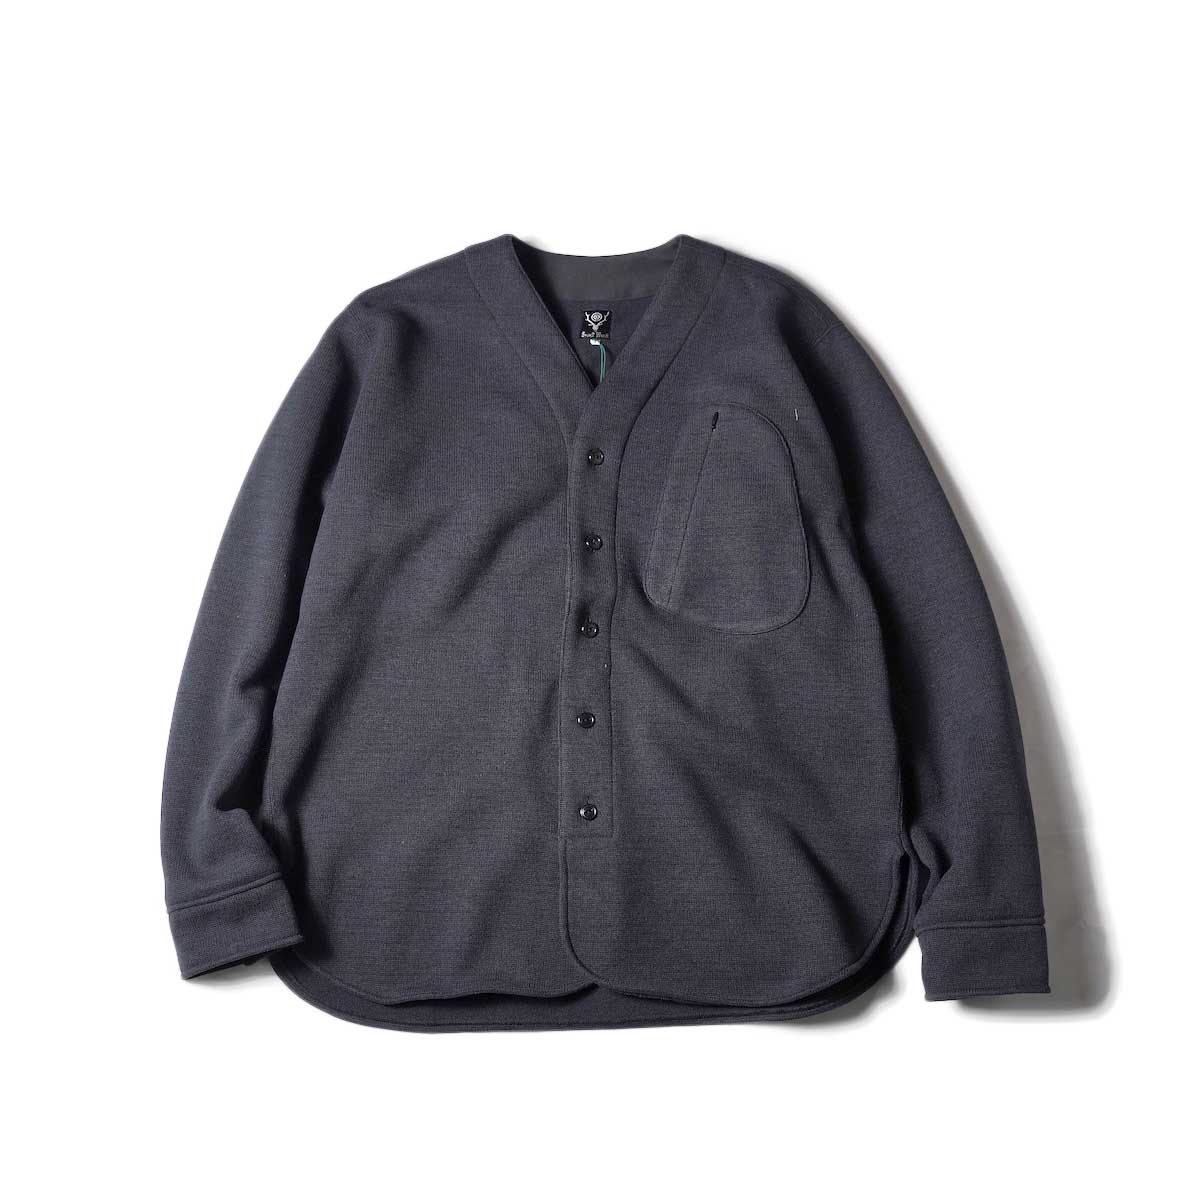 South2 West8 / Scouting Shirt - POLARTEC Fleece Lined Jersey (Black)正面